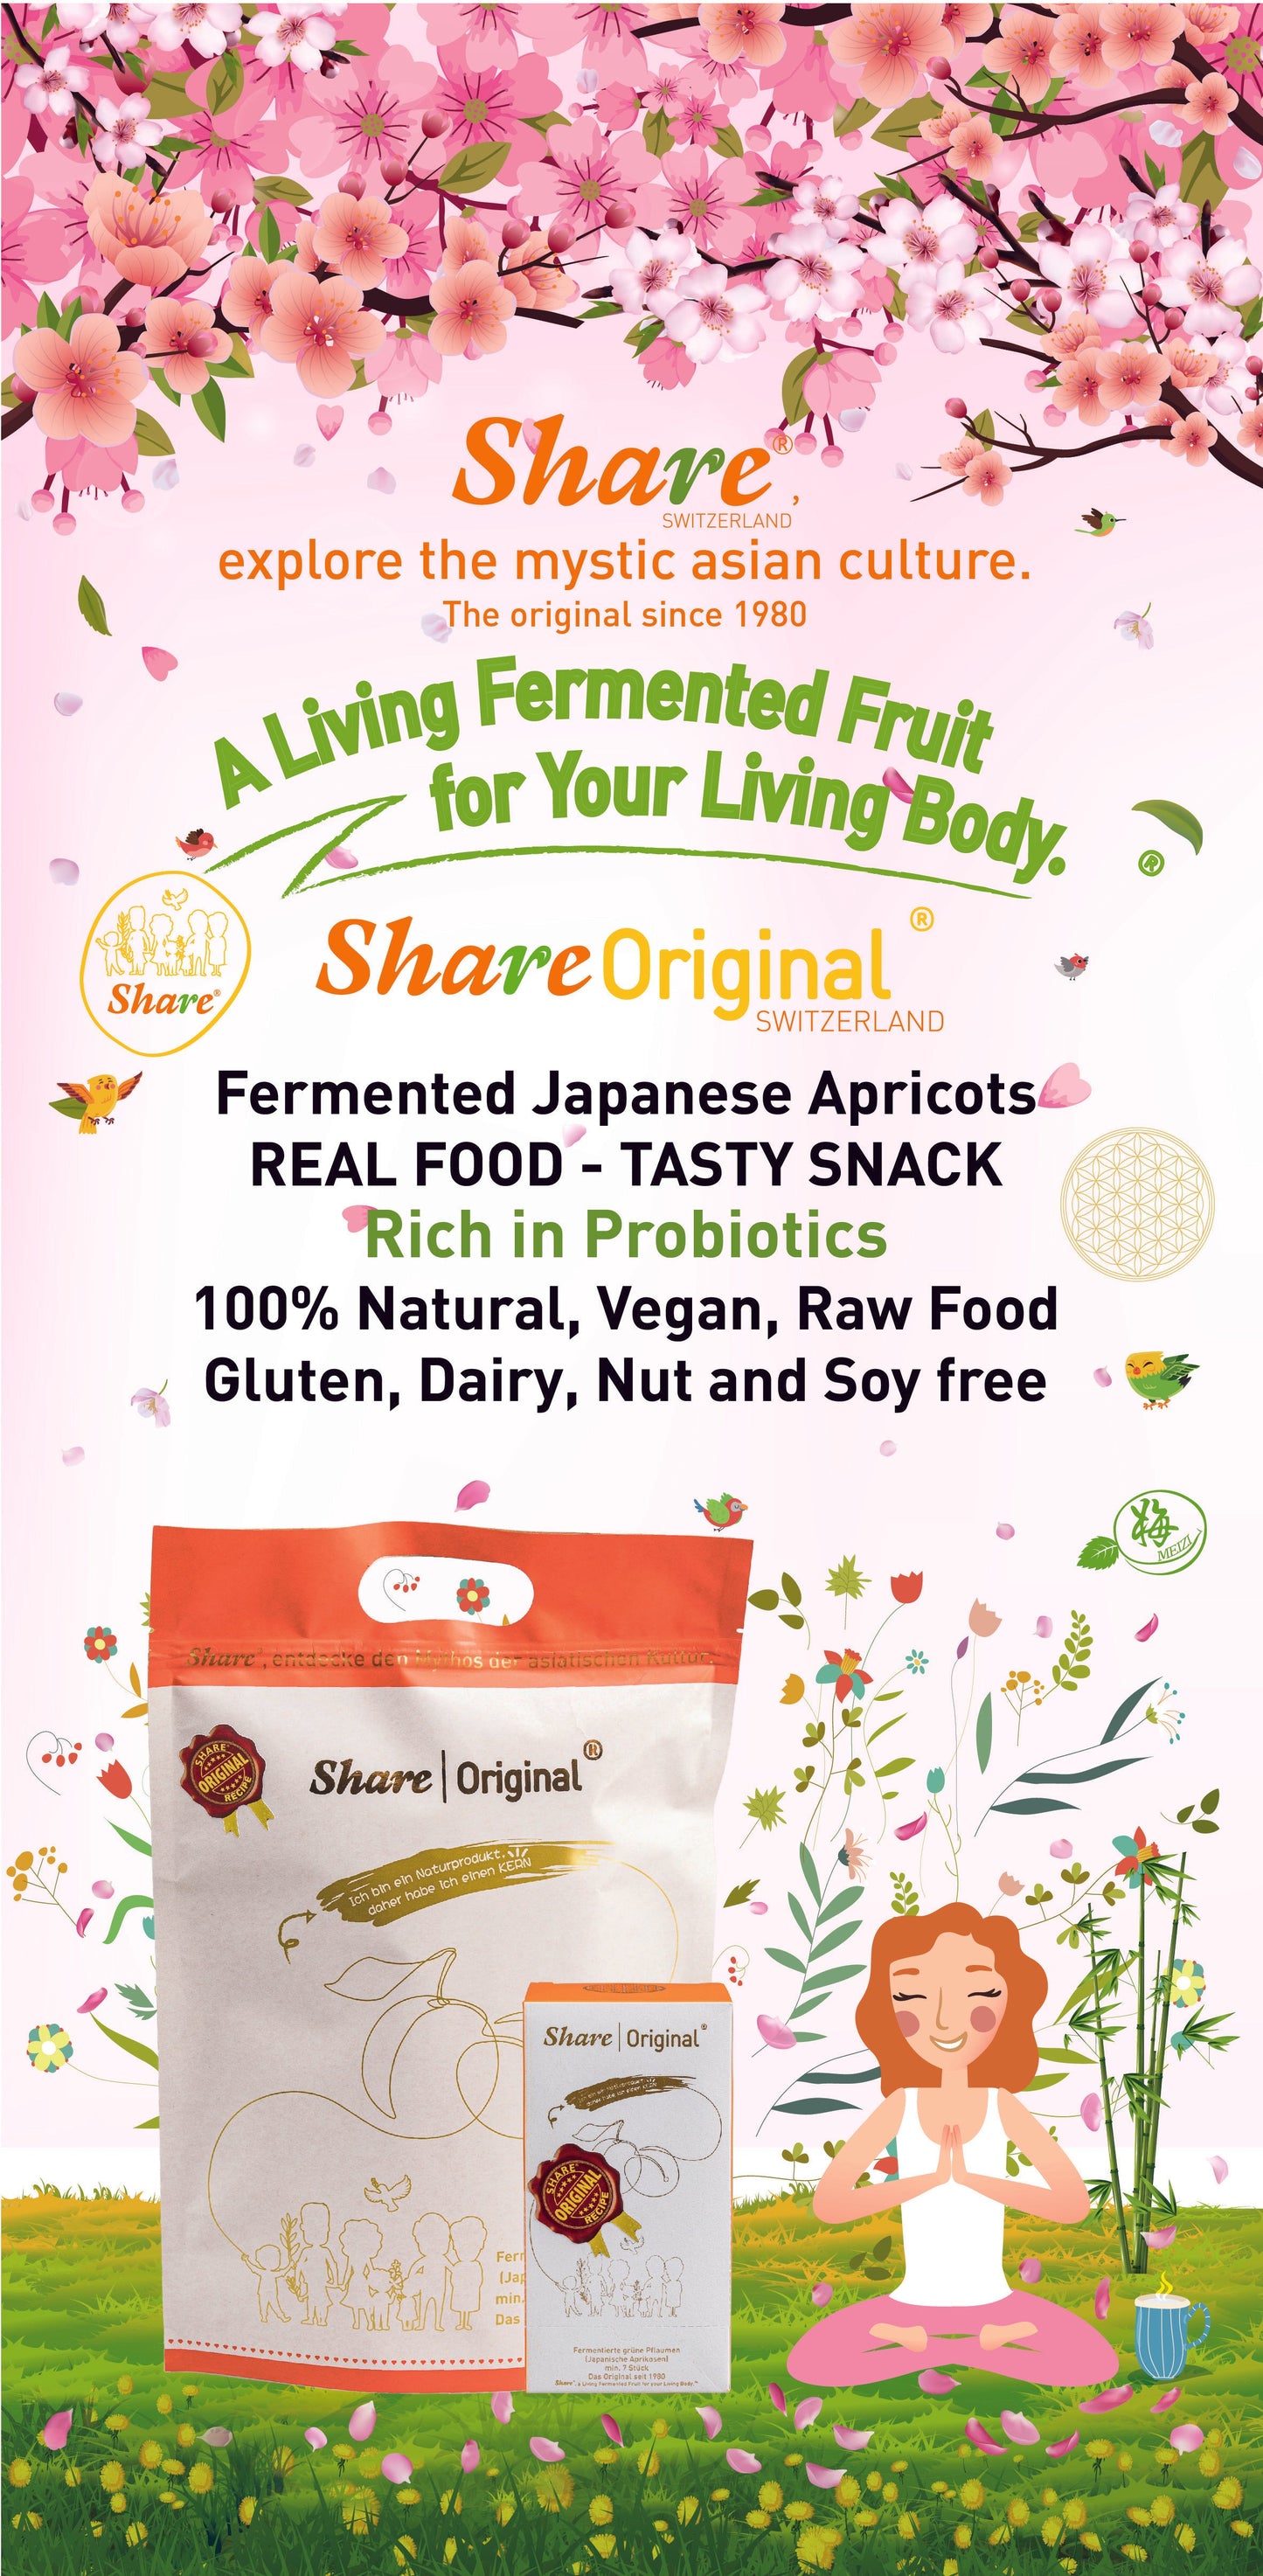 Share Original® (Organza Bag, 33 pieces): fermented Japanese apricot, effective natural alternative to lab-made laxatives and probiotics, 30-month natural fermented fruit, vegan & non-GMO, individually wrapped packet (made in Switzerland, free shipping)